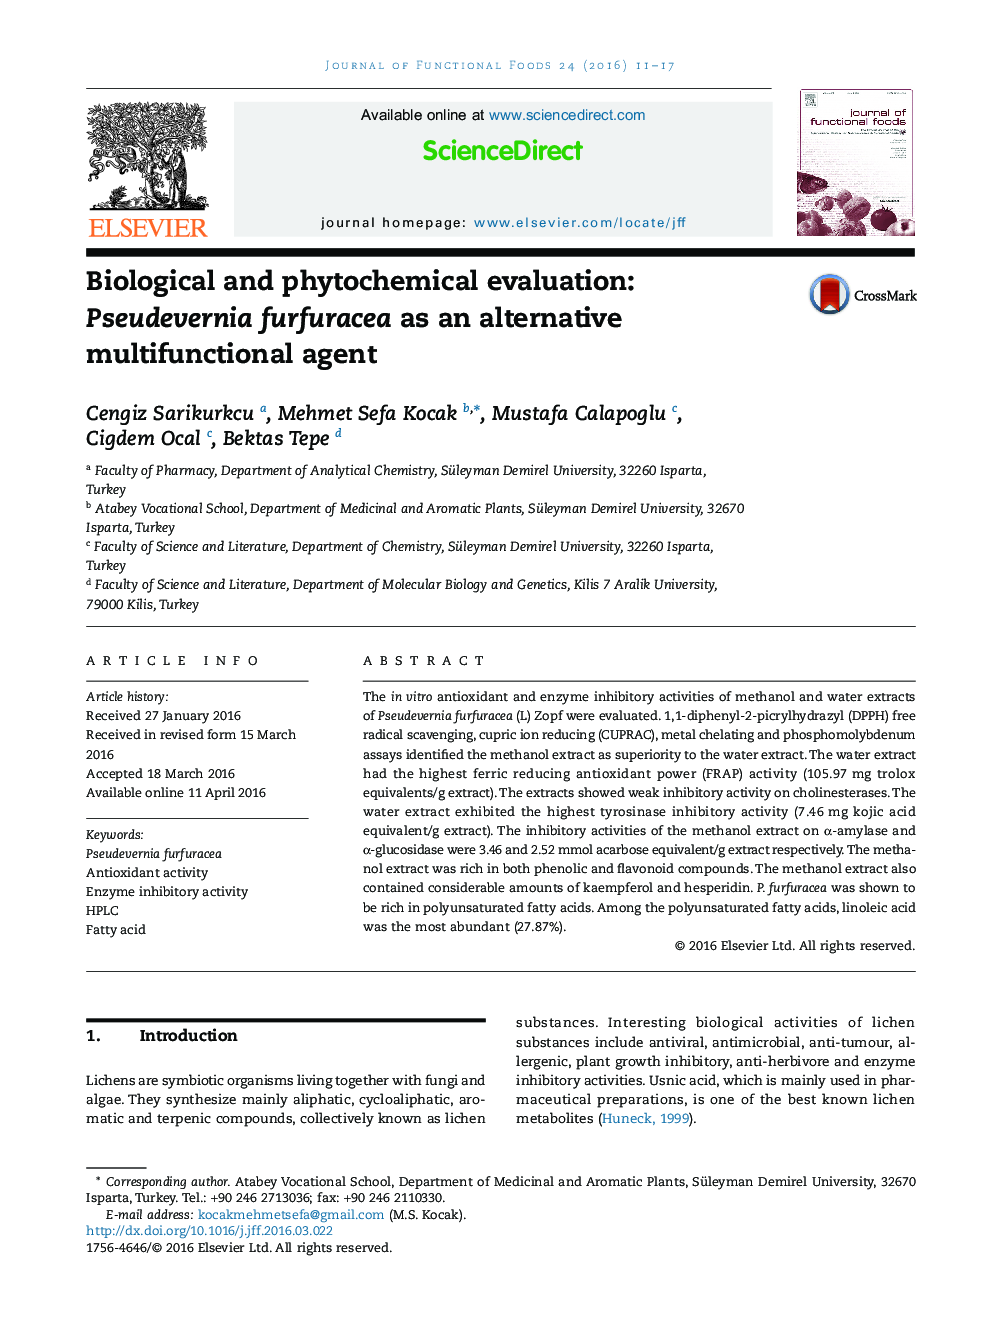 Biological and phytochemical evaluation: Pseudevernia furfuracea as an alternative multifunctional agent